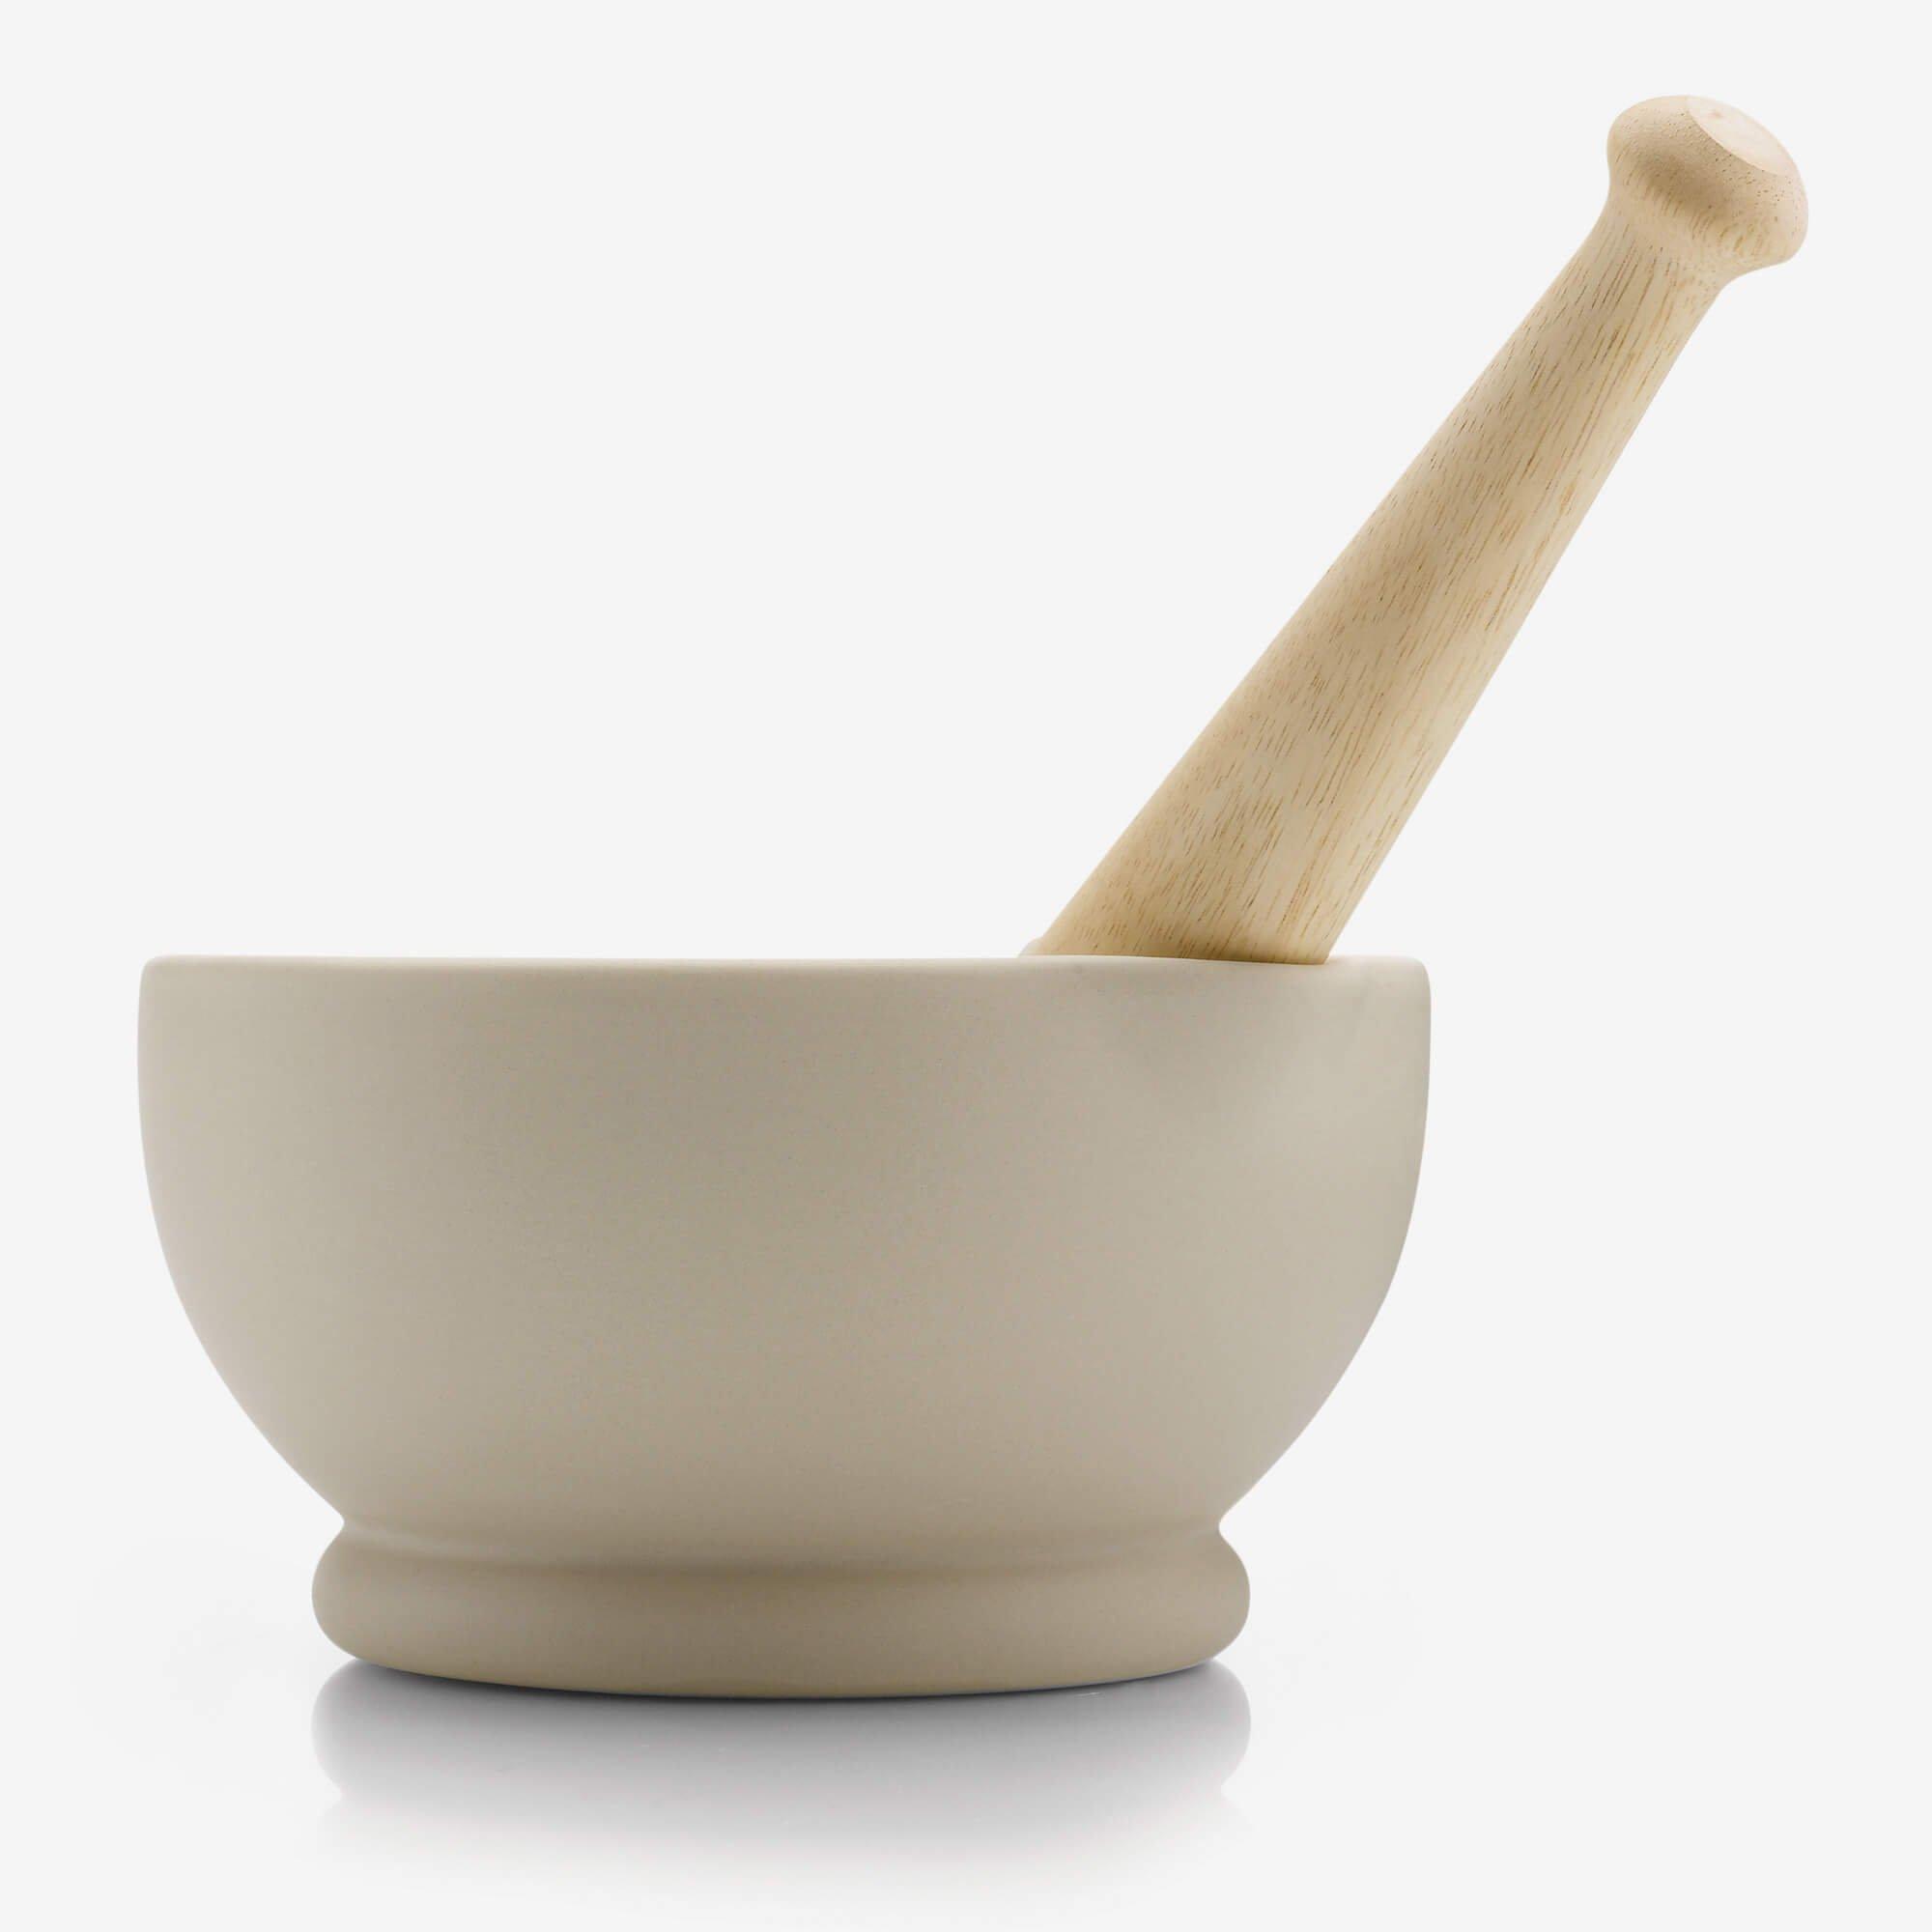 Stone Mortar & Pestle with Wooden Handle Boxed 7